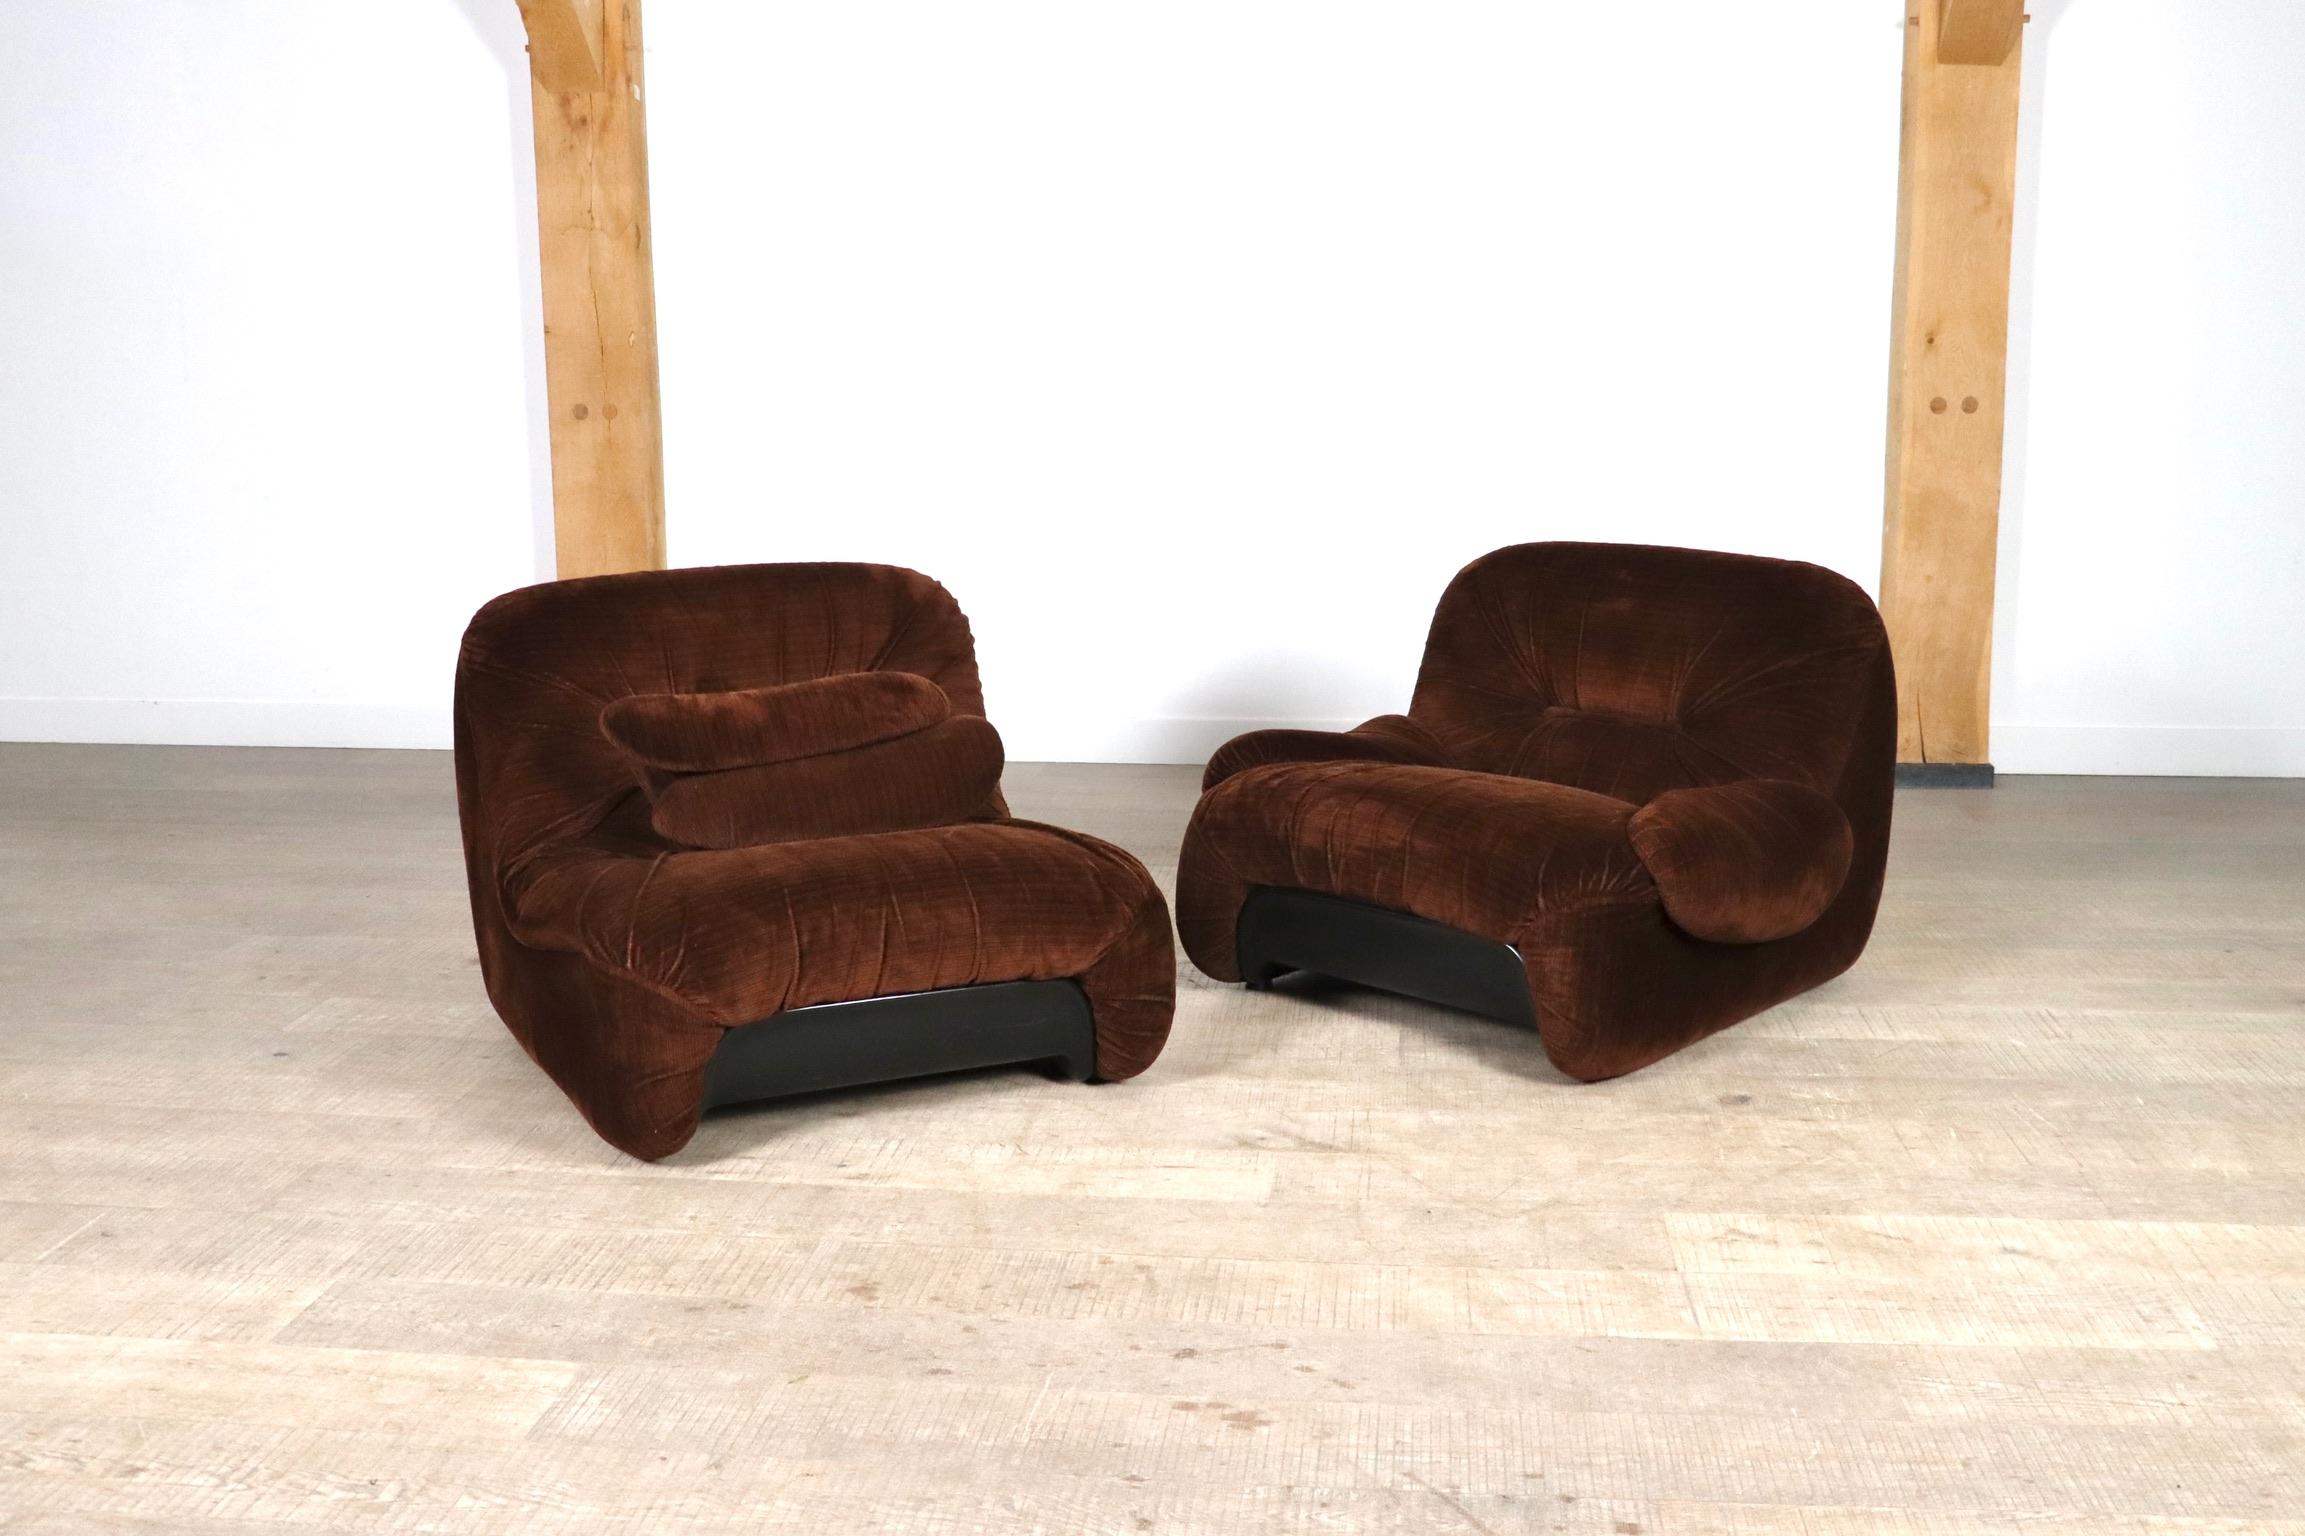 Diego Mattu’s Malù creation introduces exceptionally cozy lounge chairs produced by the Italian company 1P.

These chairs are made to reach an ultimate level of comfort as can clearly be recognized in the design. The base is constructed from ABS, a